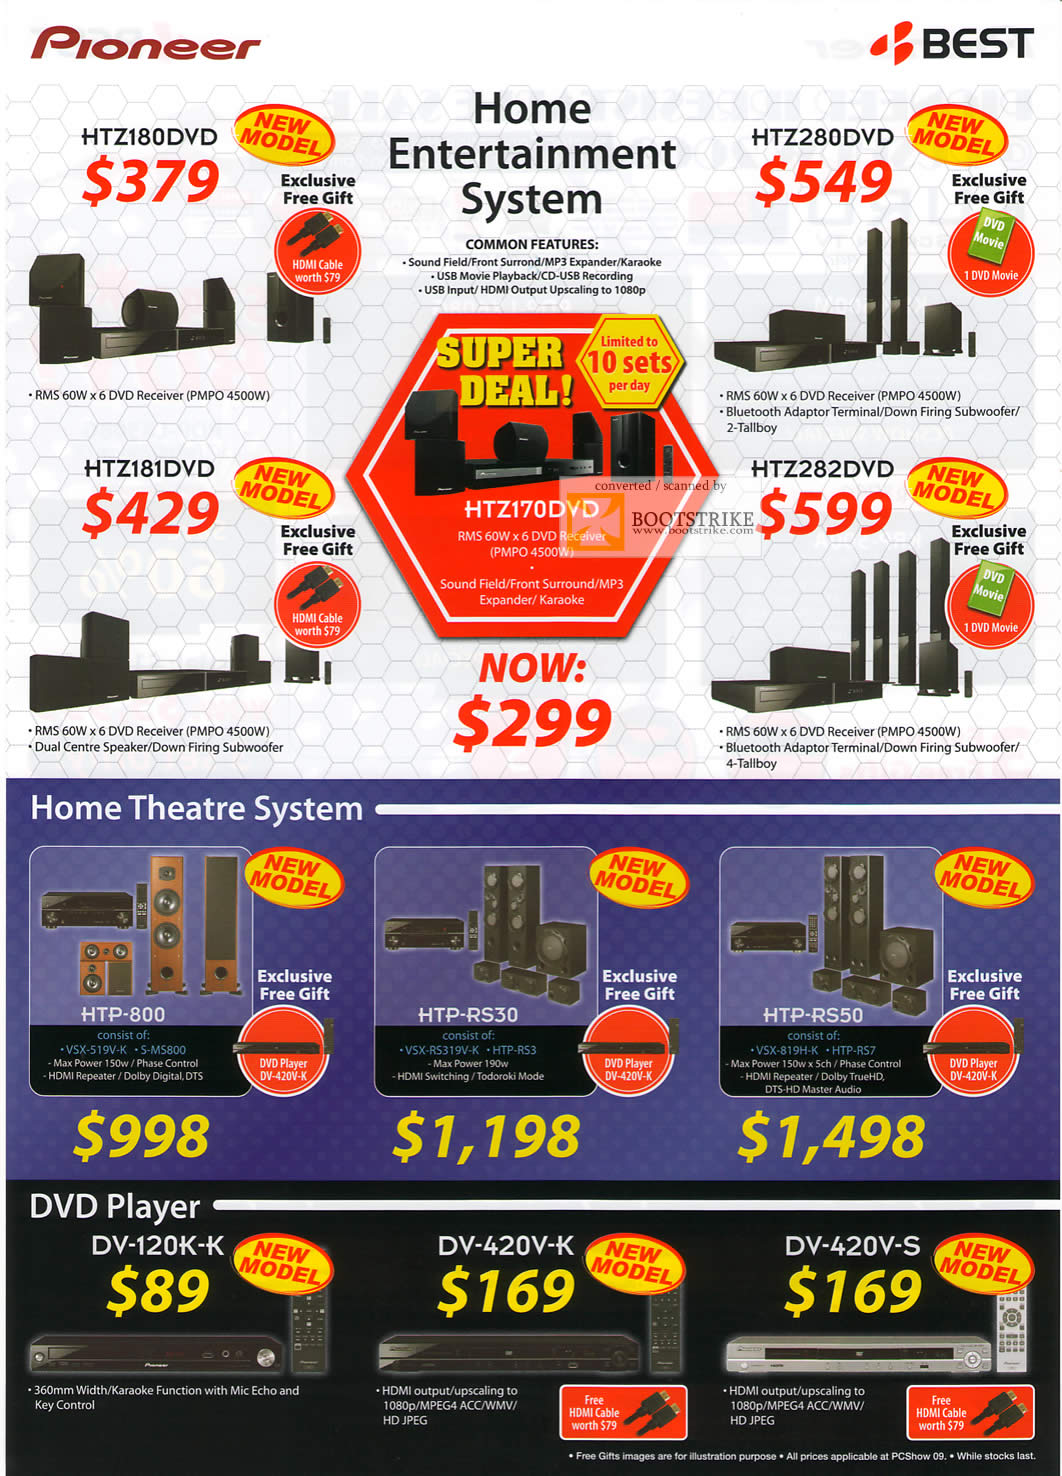 PC Show 2009 price list image brochure of Pioneer Home Theatre Entertainment System DVD Player